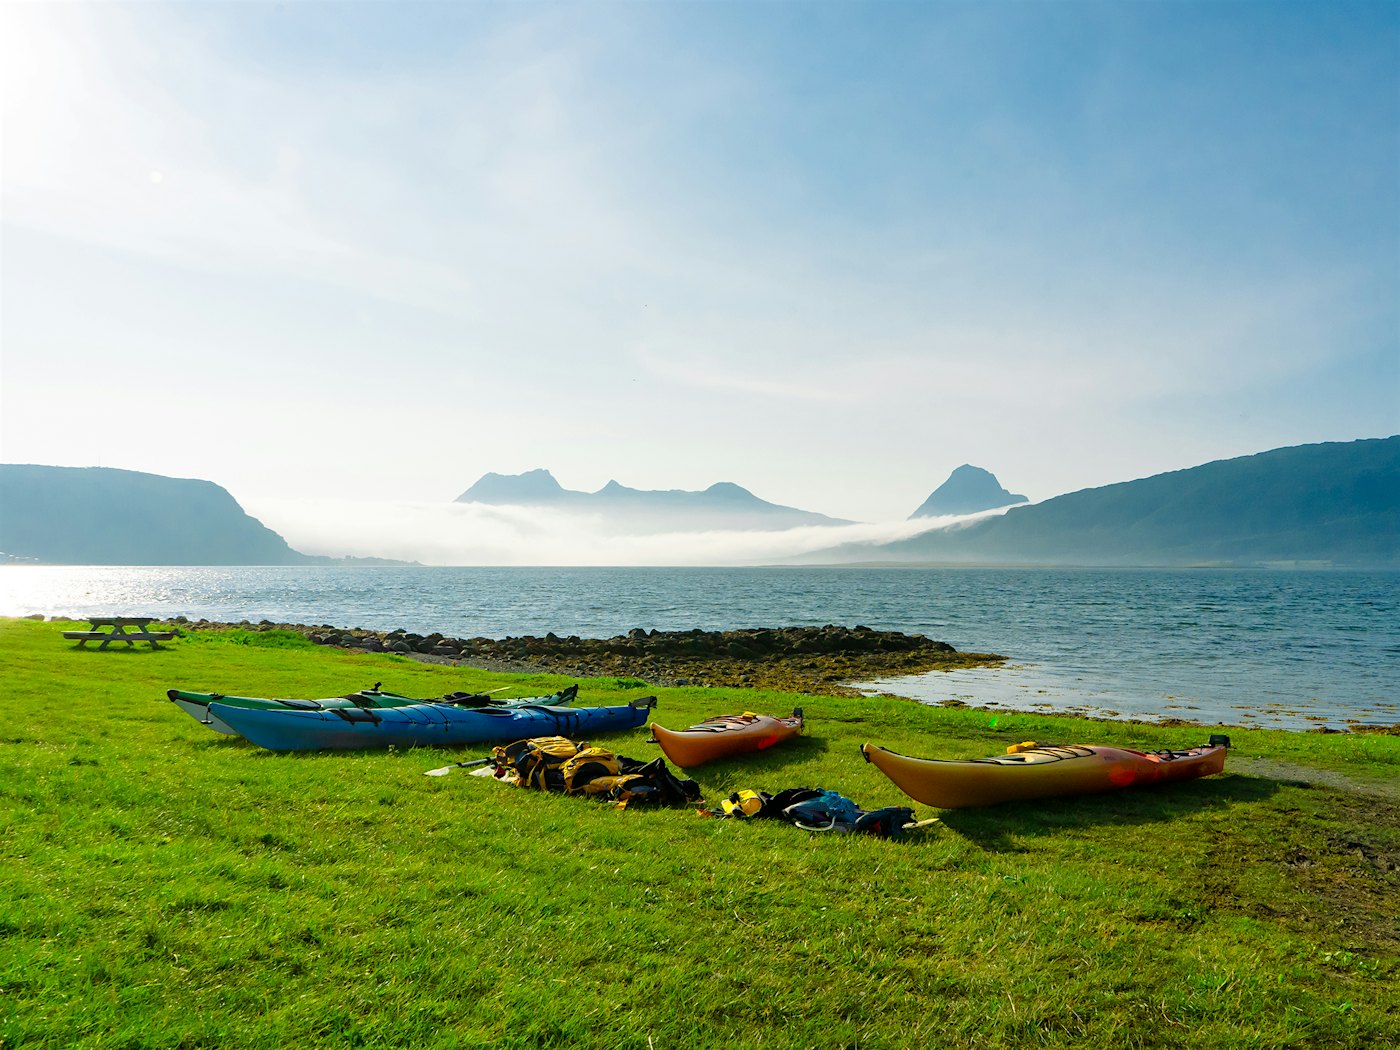 Kayaks lie on the shoreline with mountains in the background. Photo